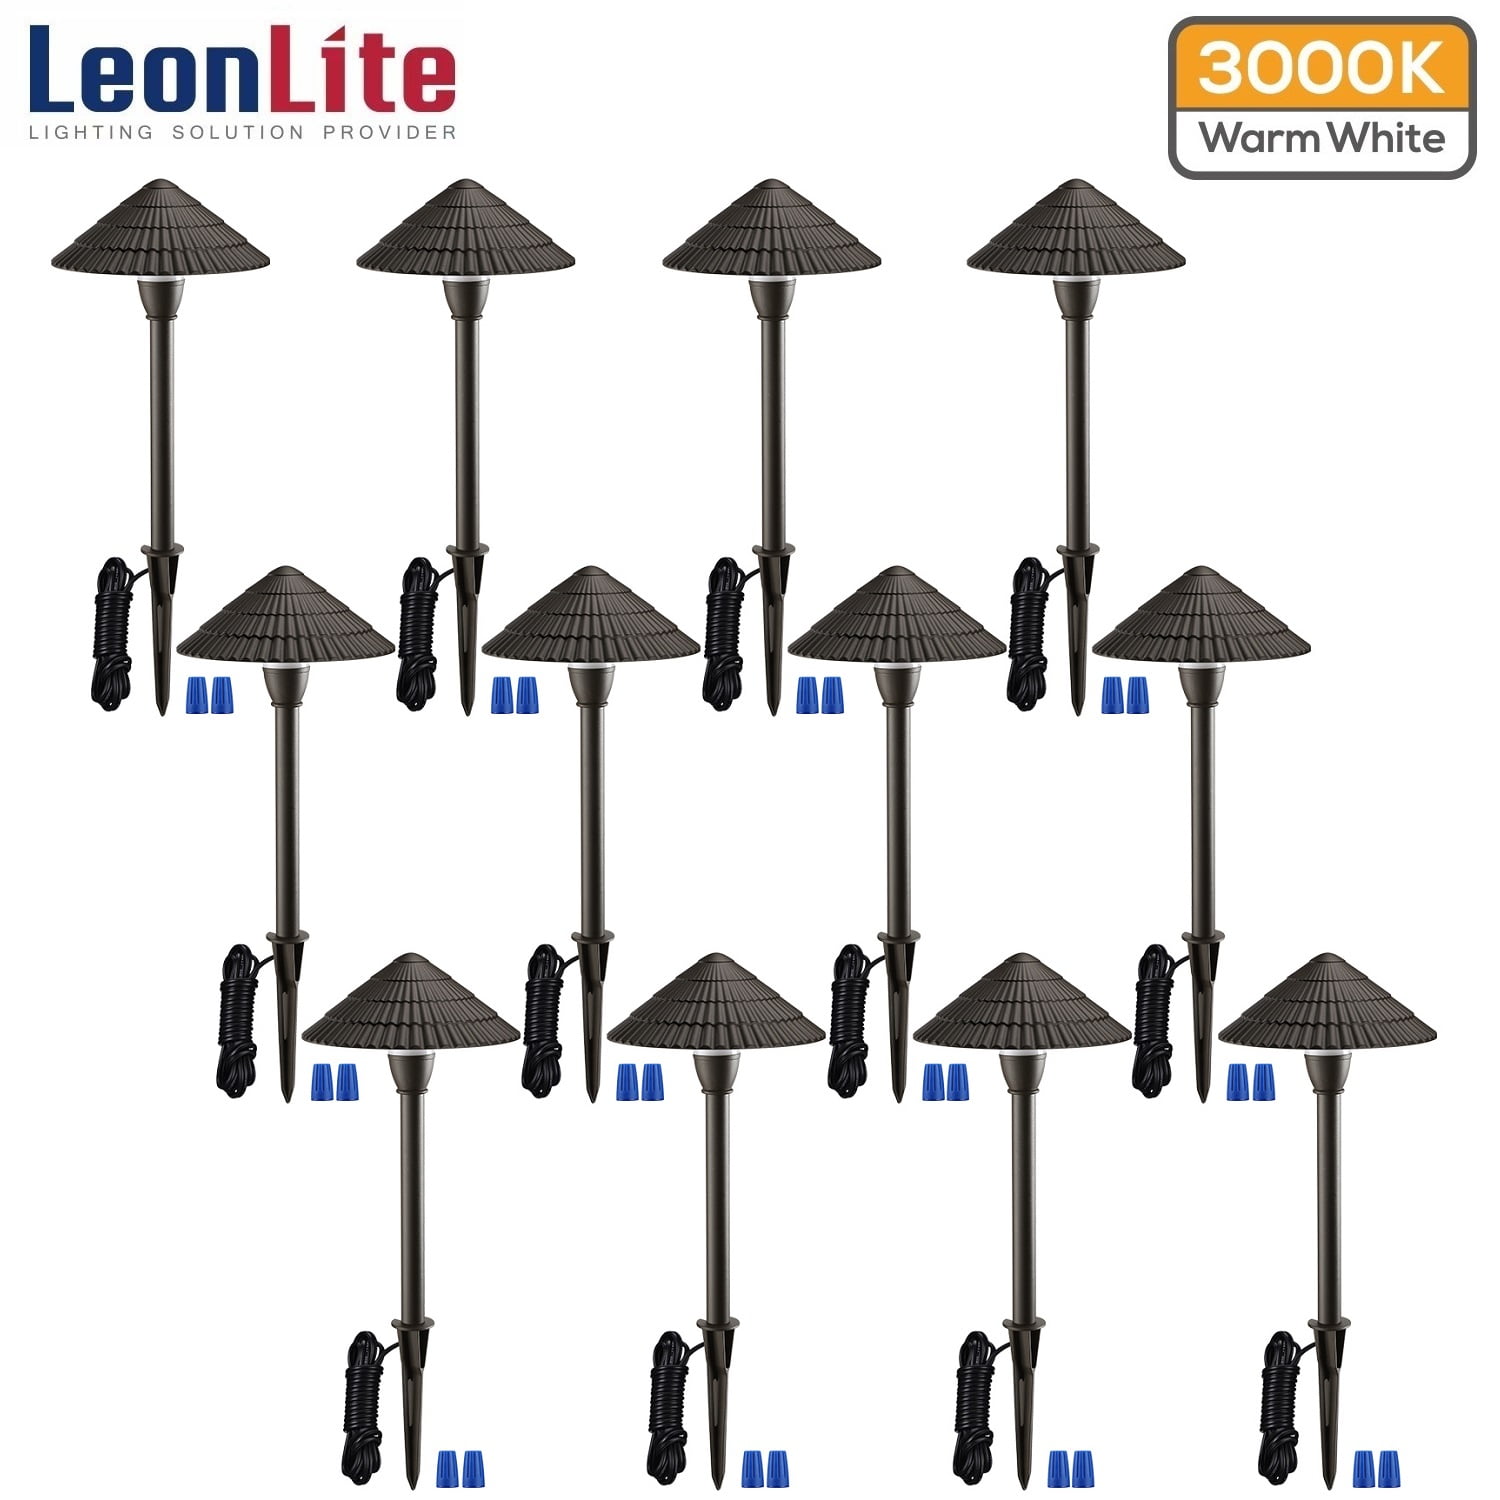 LEONLITE 12-Pack 3W LED Landscape Light, Waterproof, 12V Low Voltage, 3000K  Warm White, Aluminum Housing with Ground Stake, Years Warranty, Mushroom  Shape for Outdoor Pathway, Garden Yard